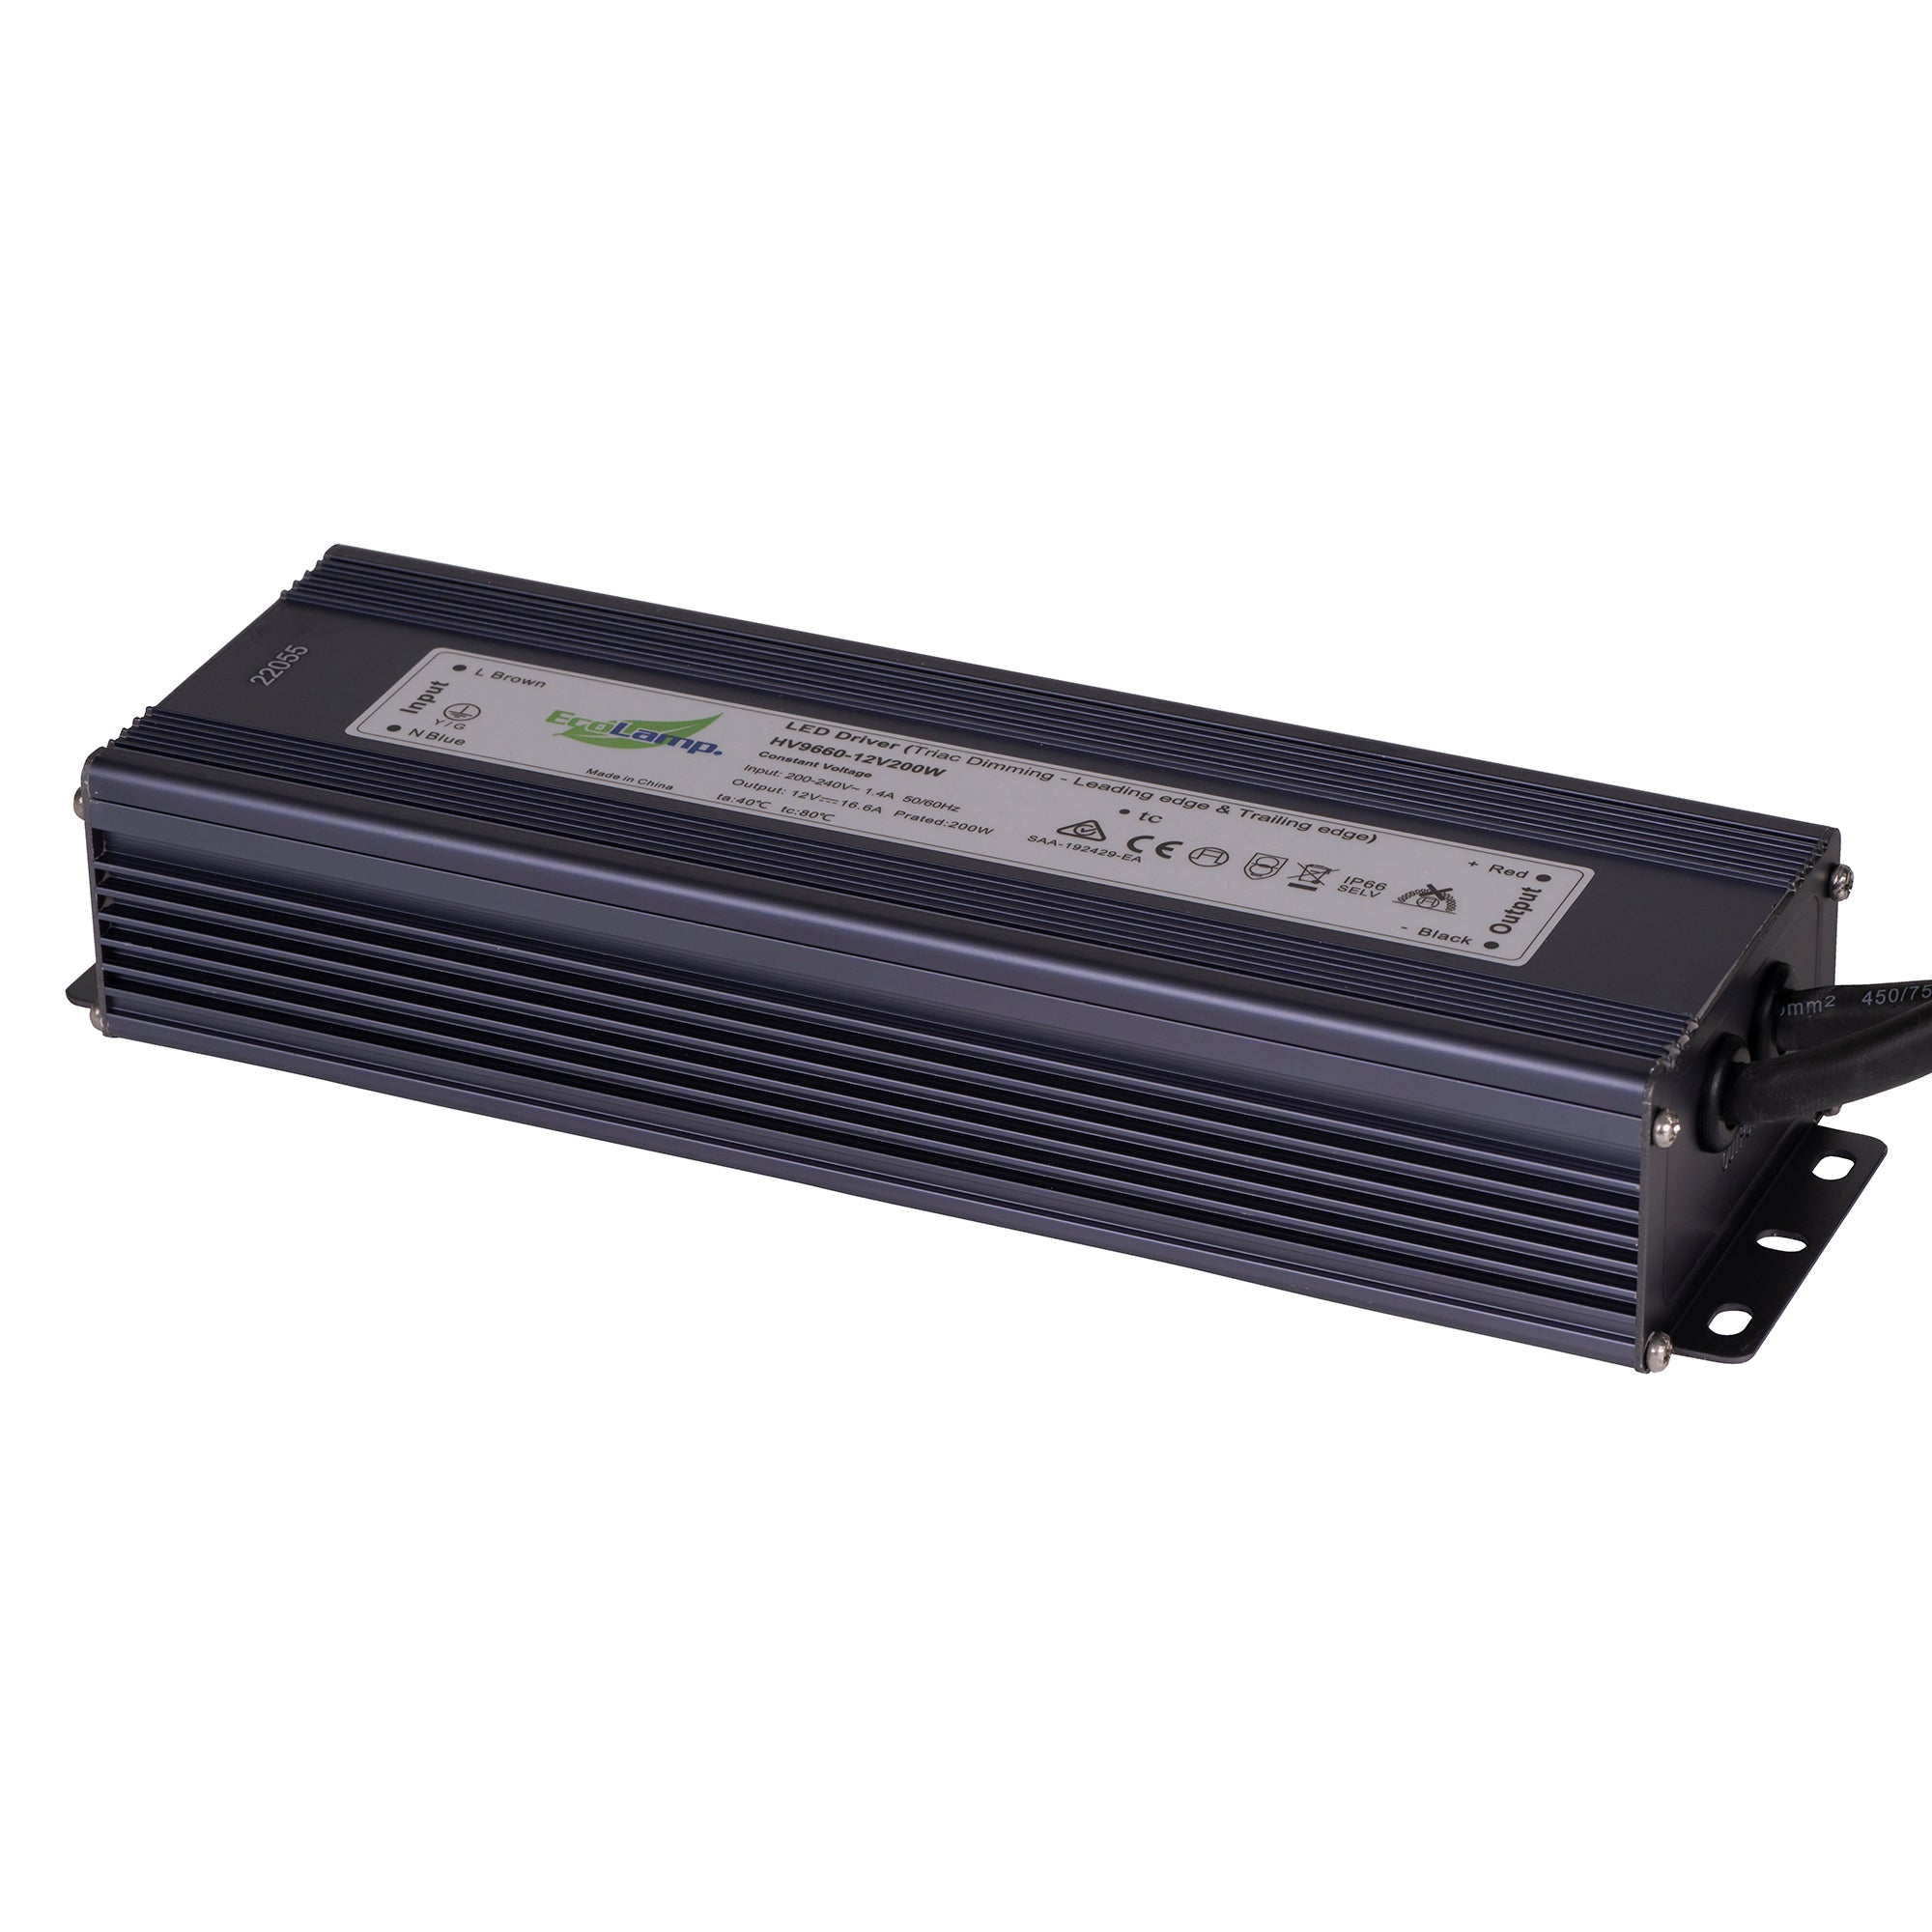 HV9660-200W - 200W Weatherproof Dimmable LED Driver